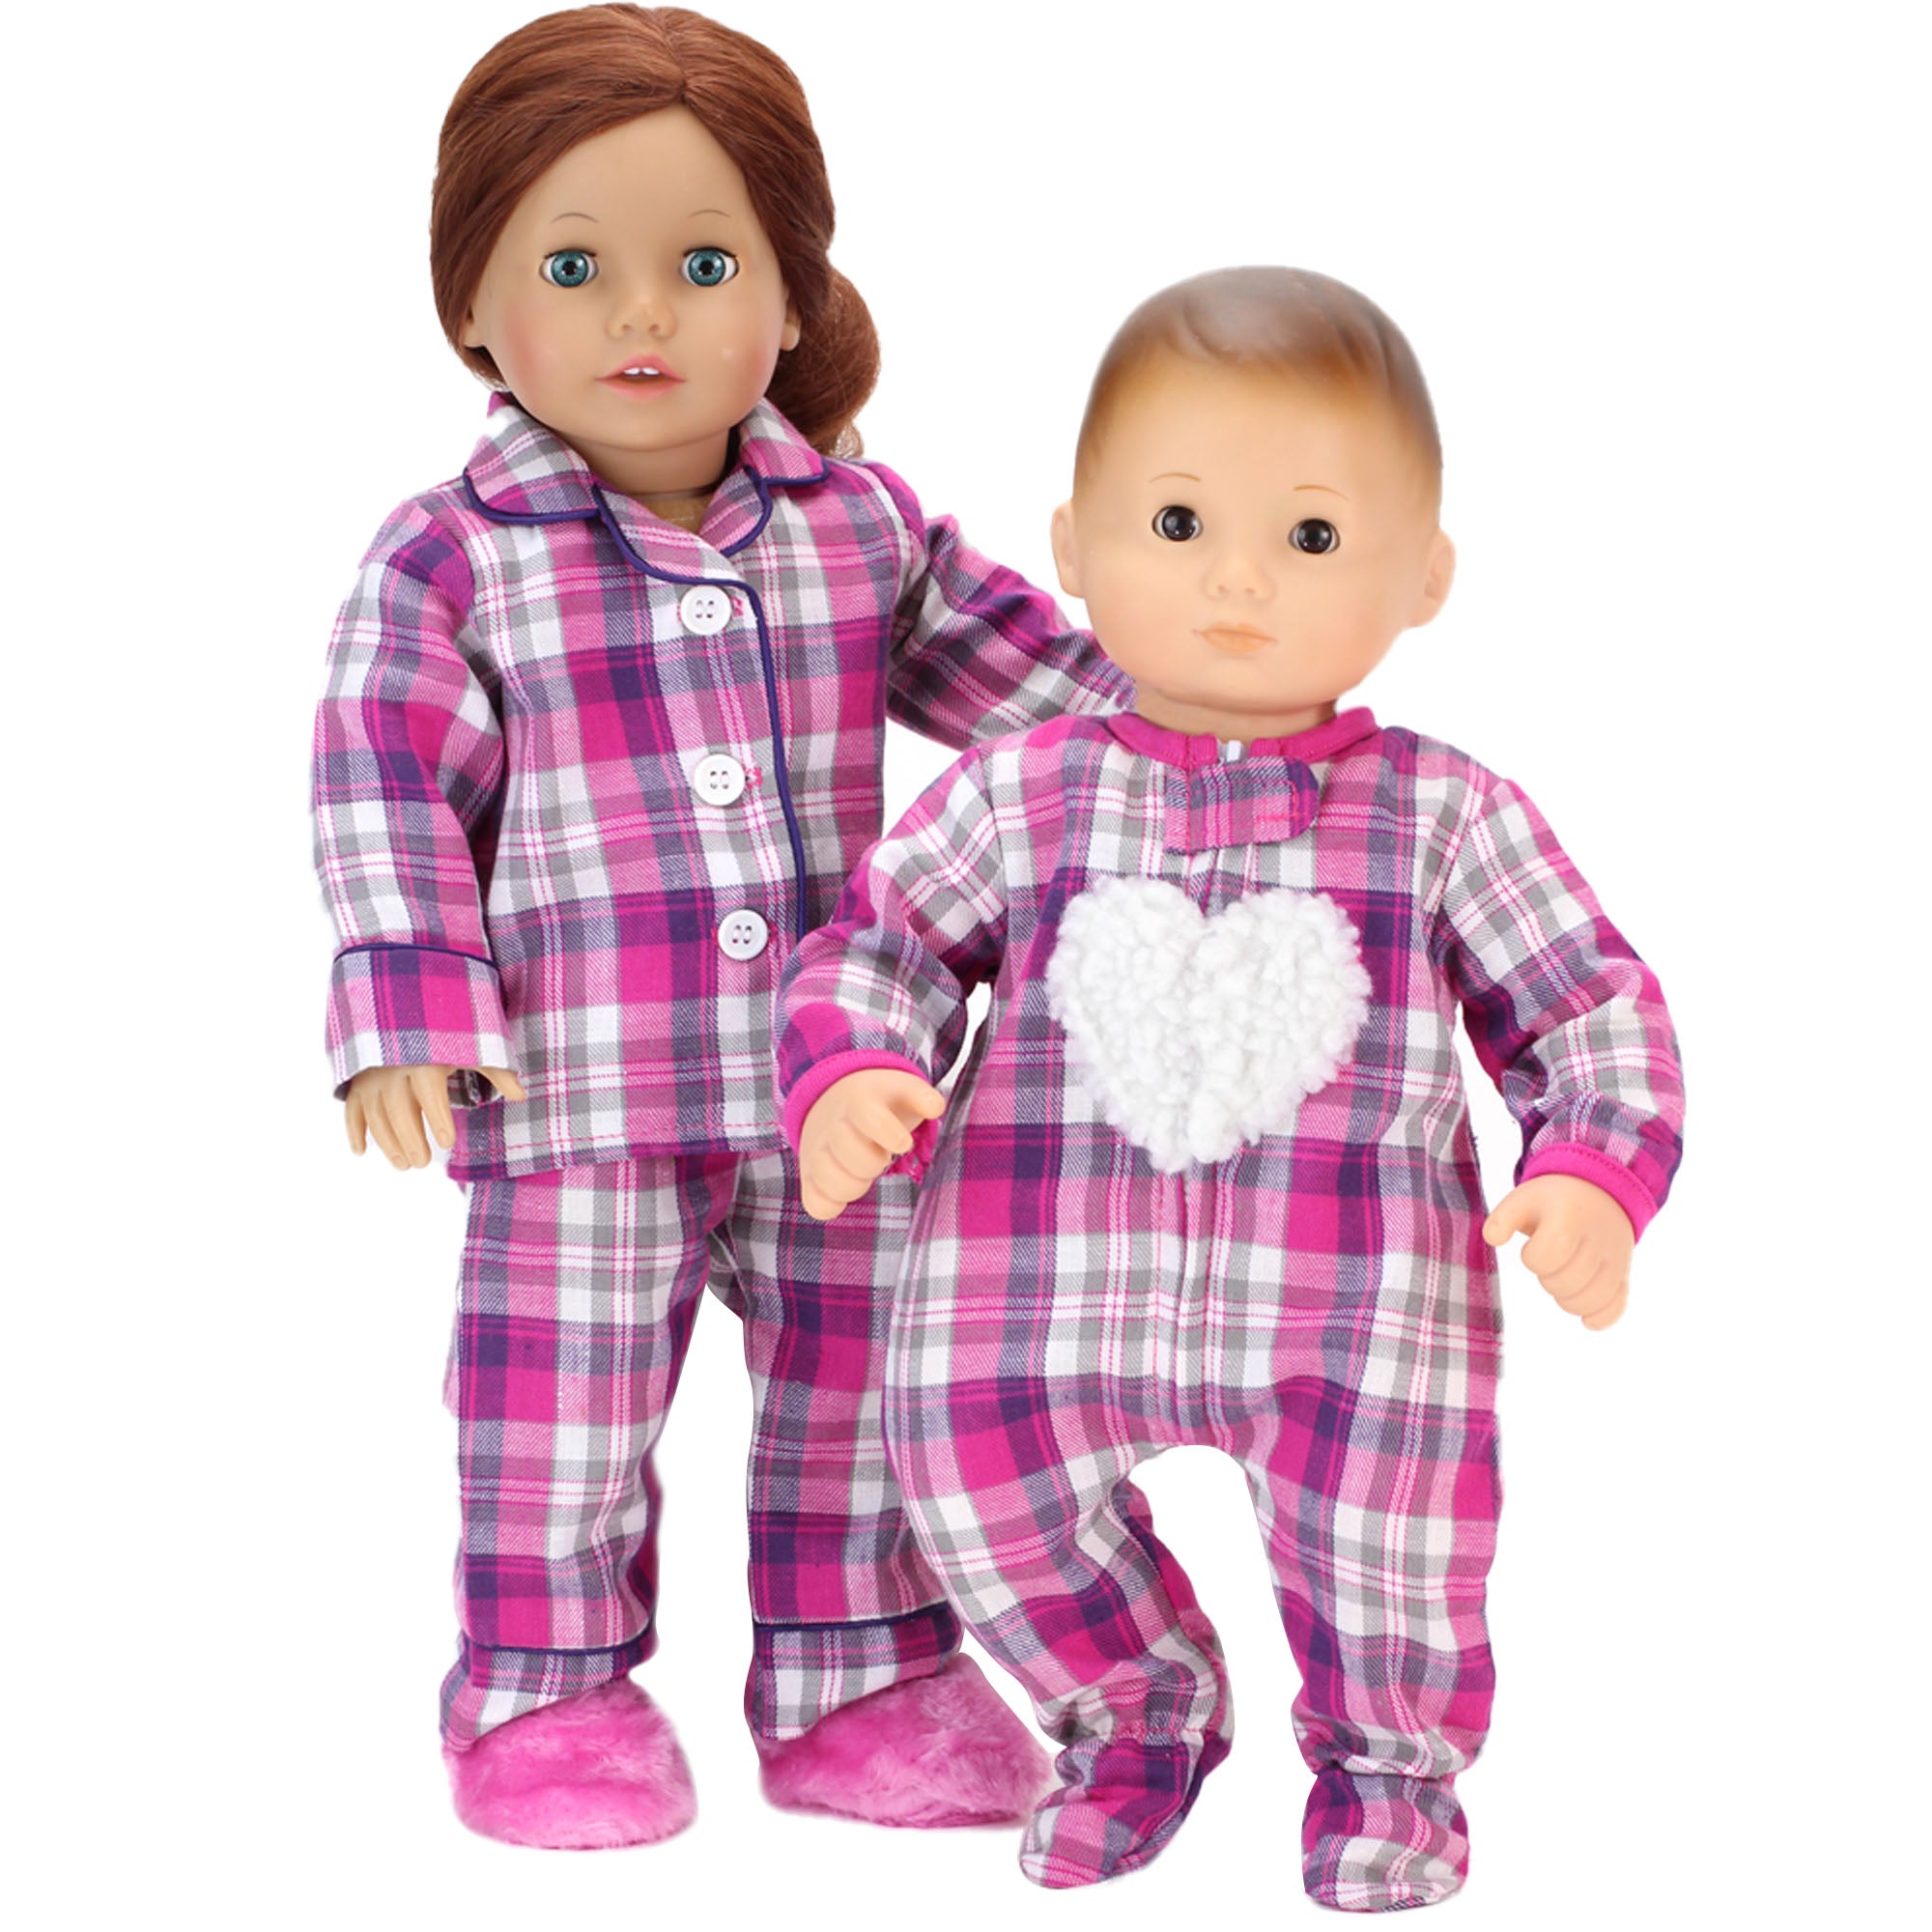 Sophia's Flannel Pajama & Slippers Set for 18'' Dolls, Pink